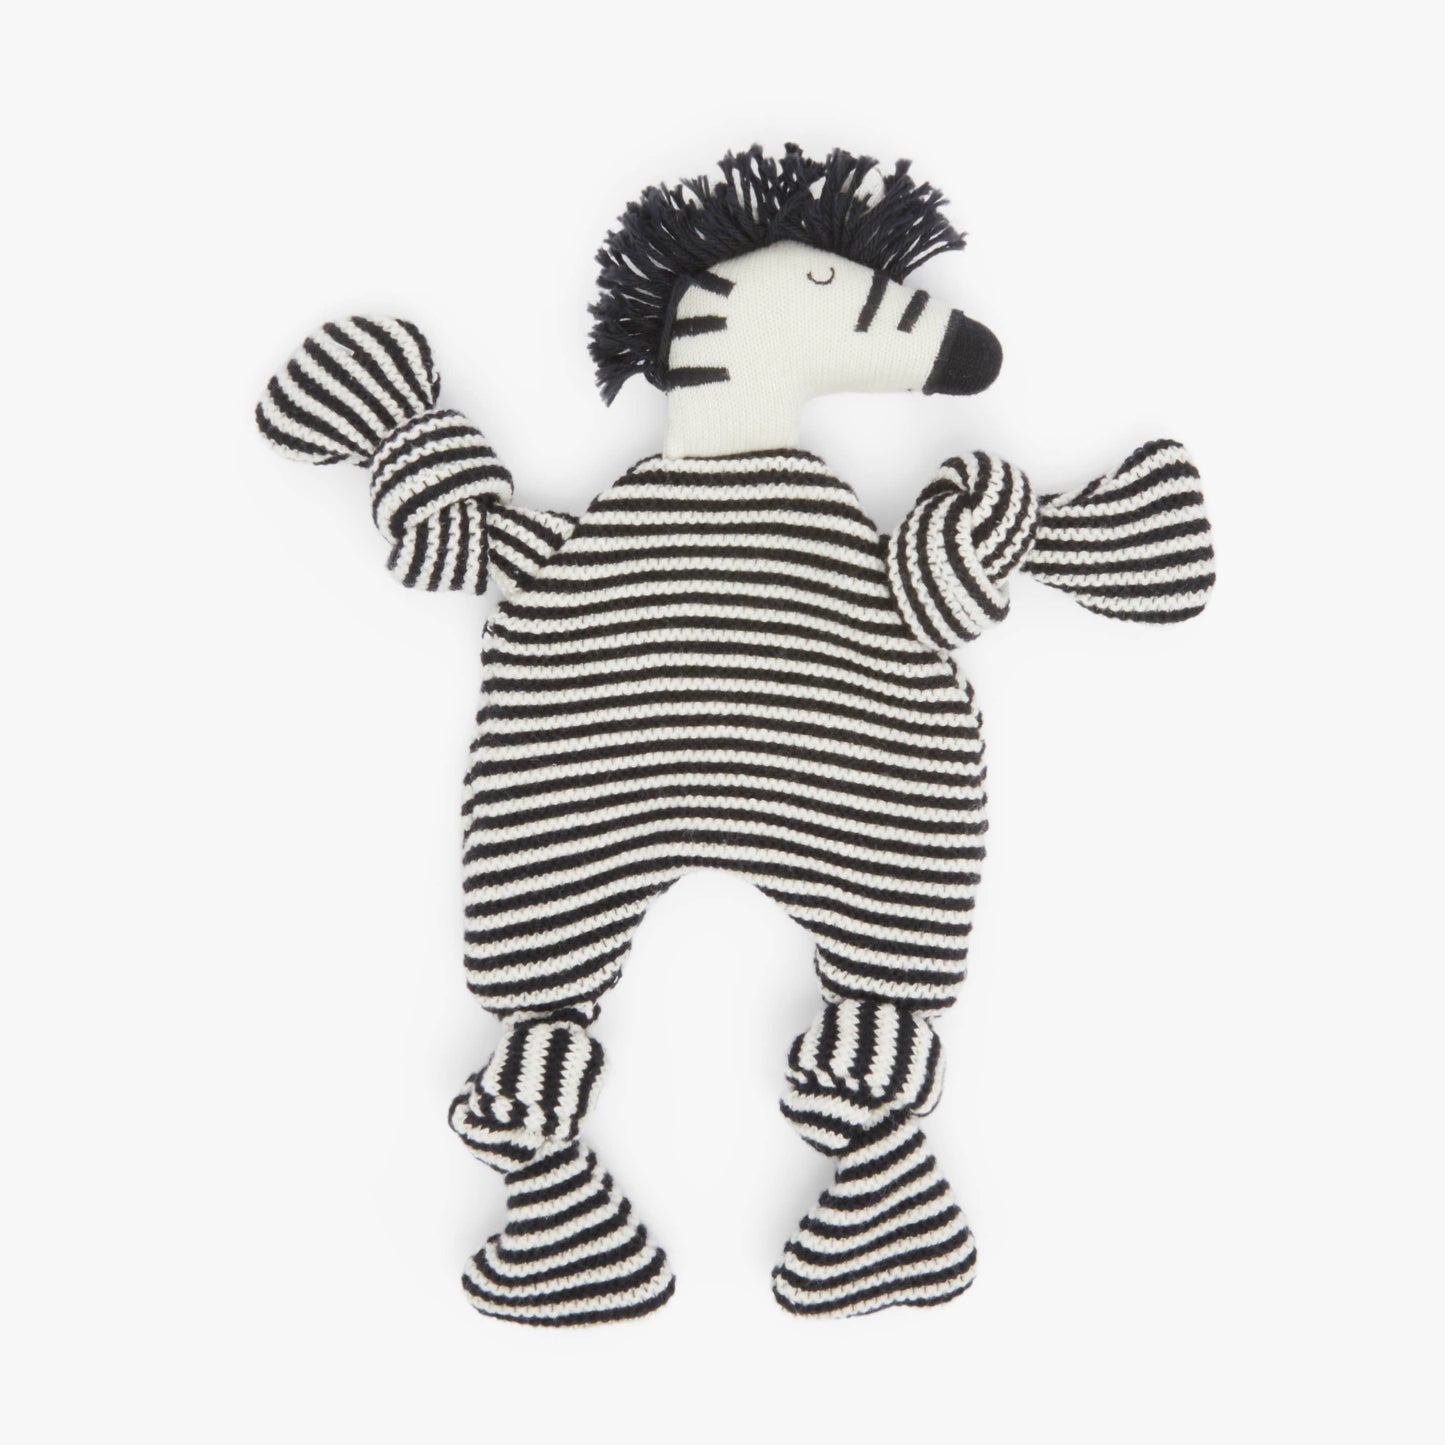 Knitted Baby Comforter Cuddle Cloth - Zebra